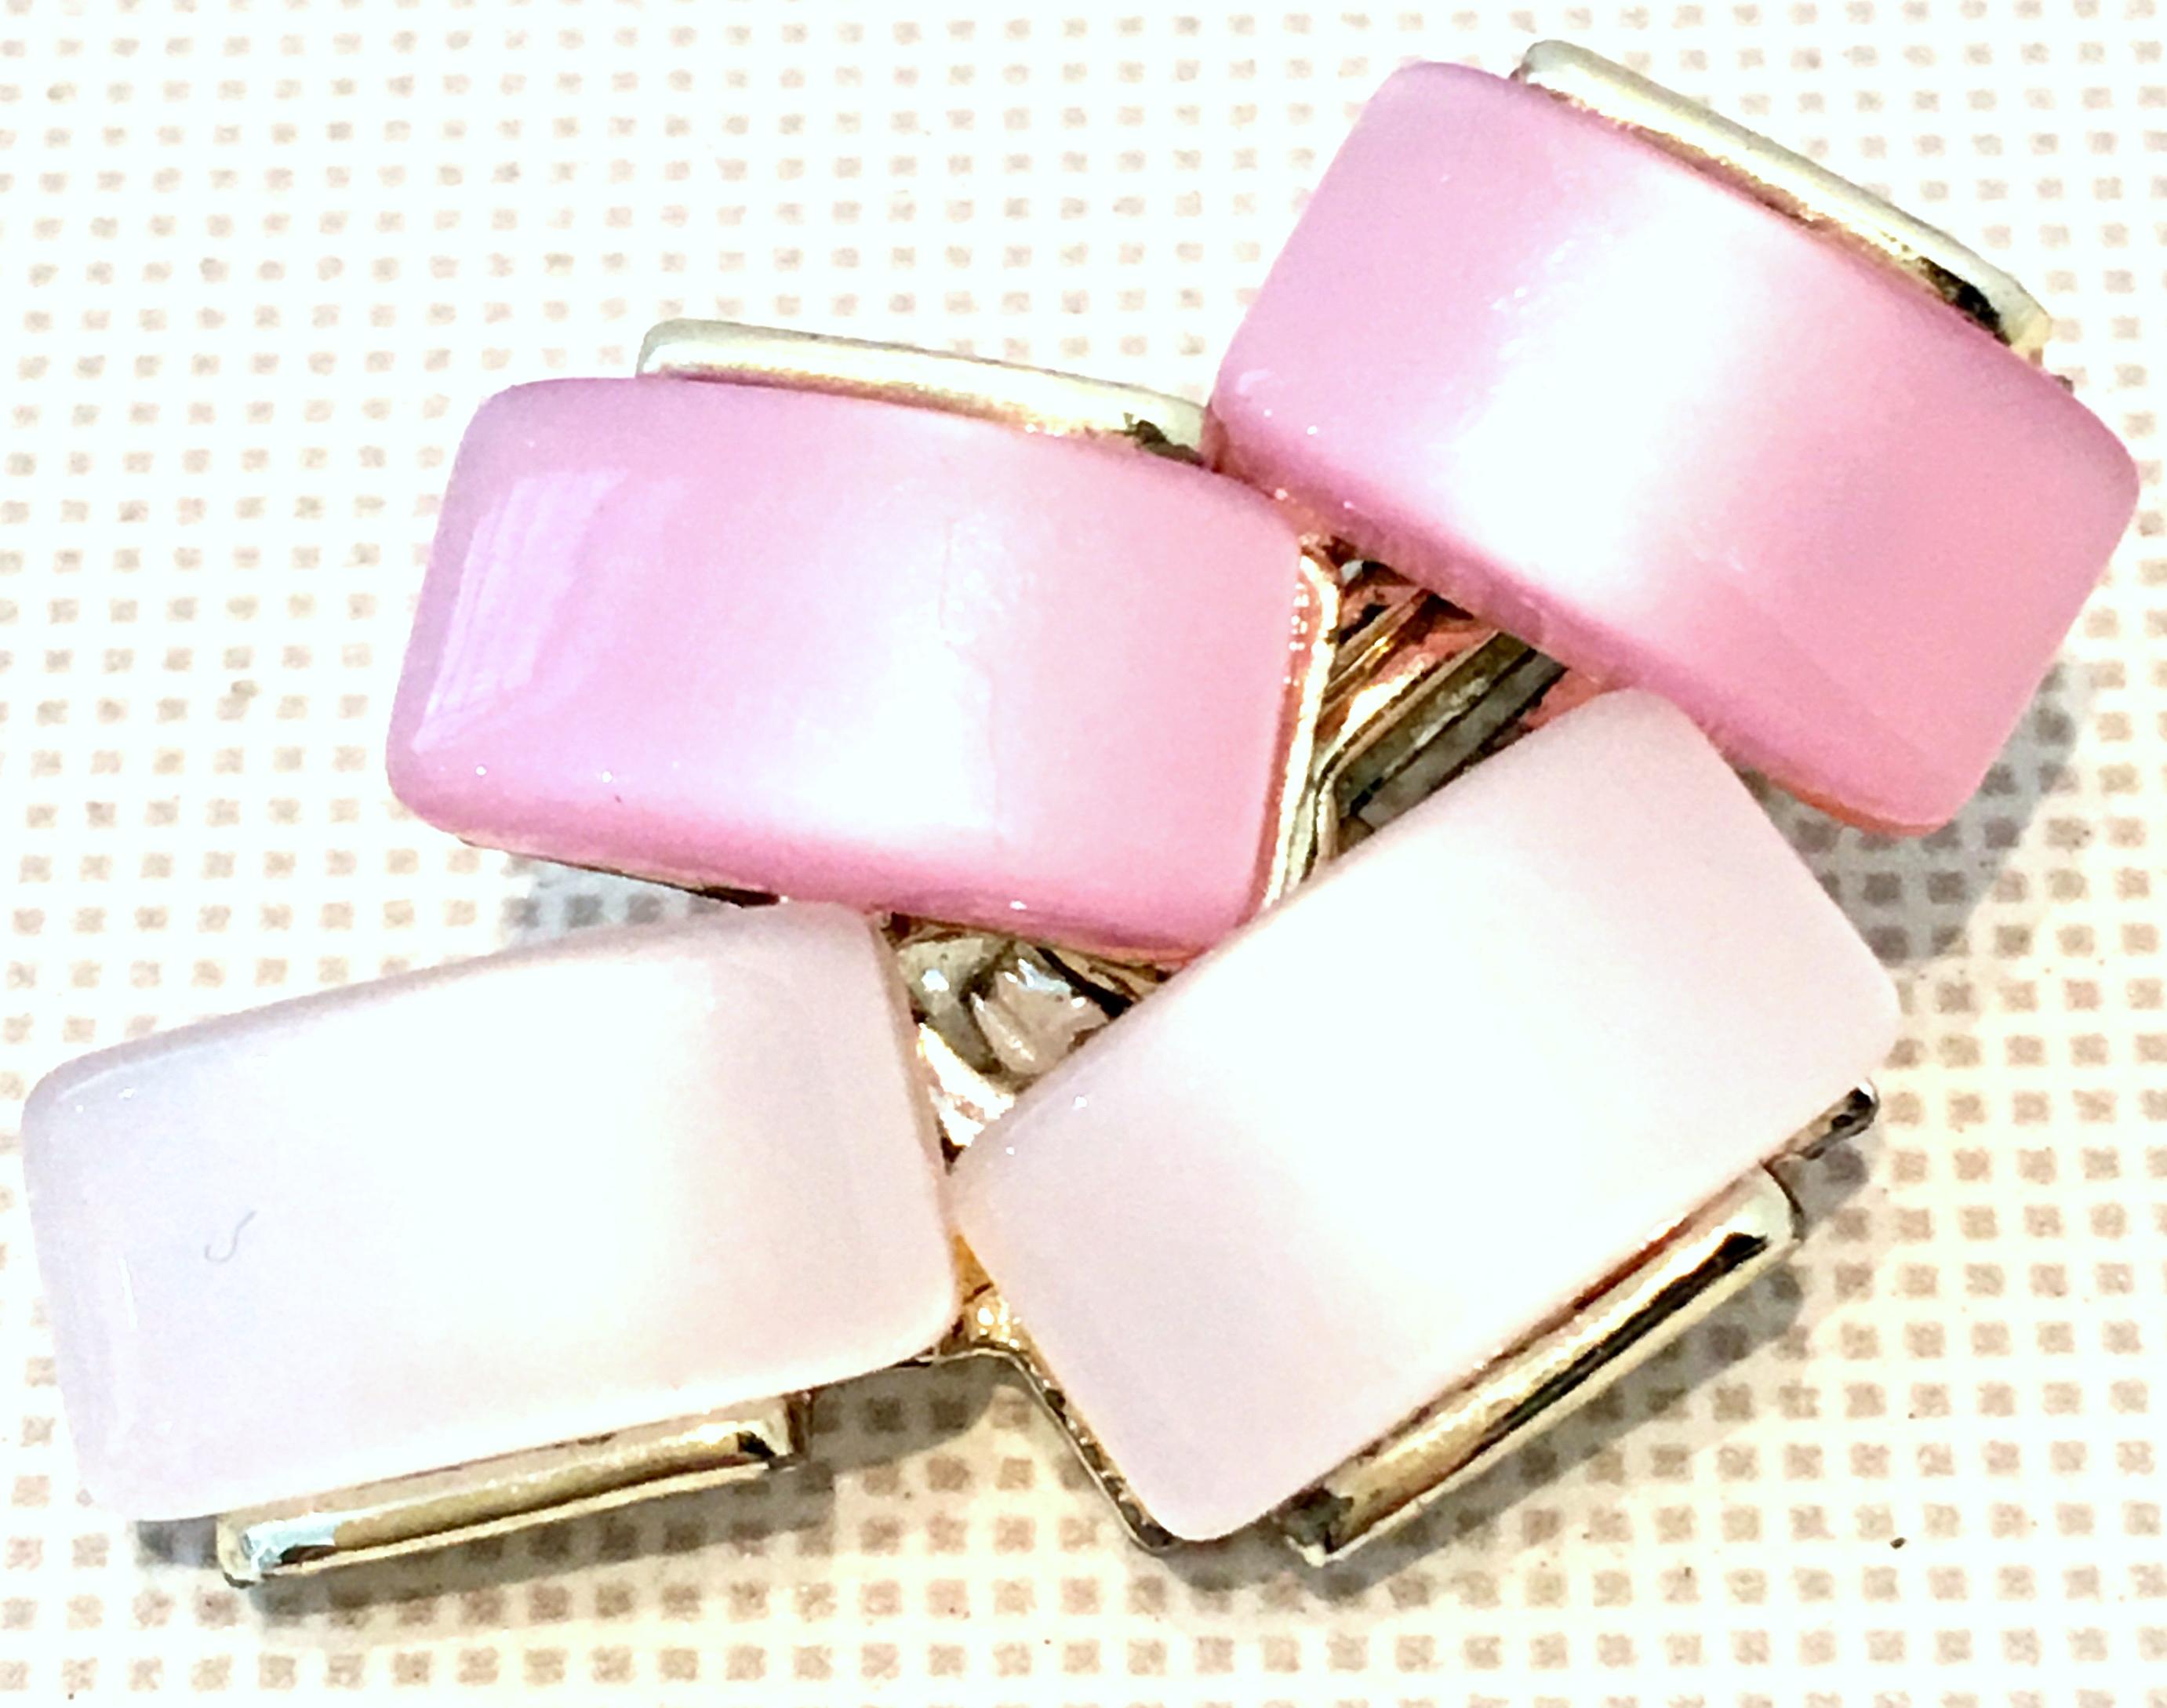 20th Century pair of silver and two tones of iridescent pink geometric Lucite stone clip style earrings by, Coro.